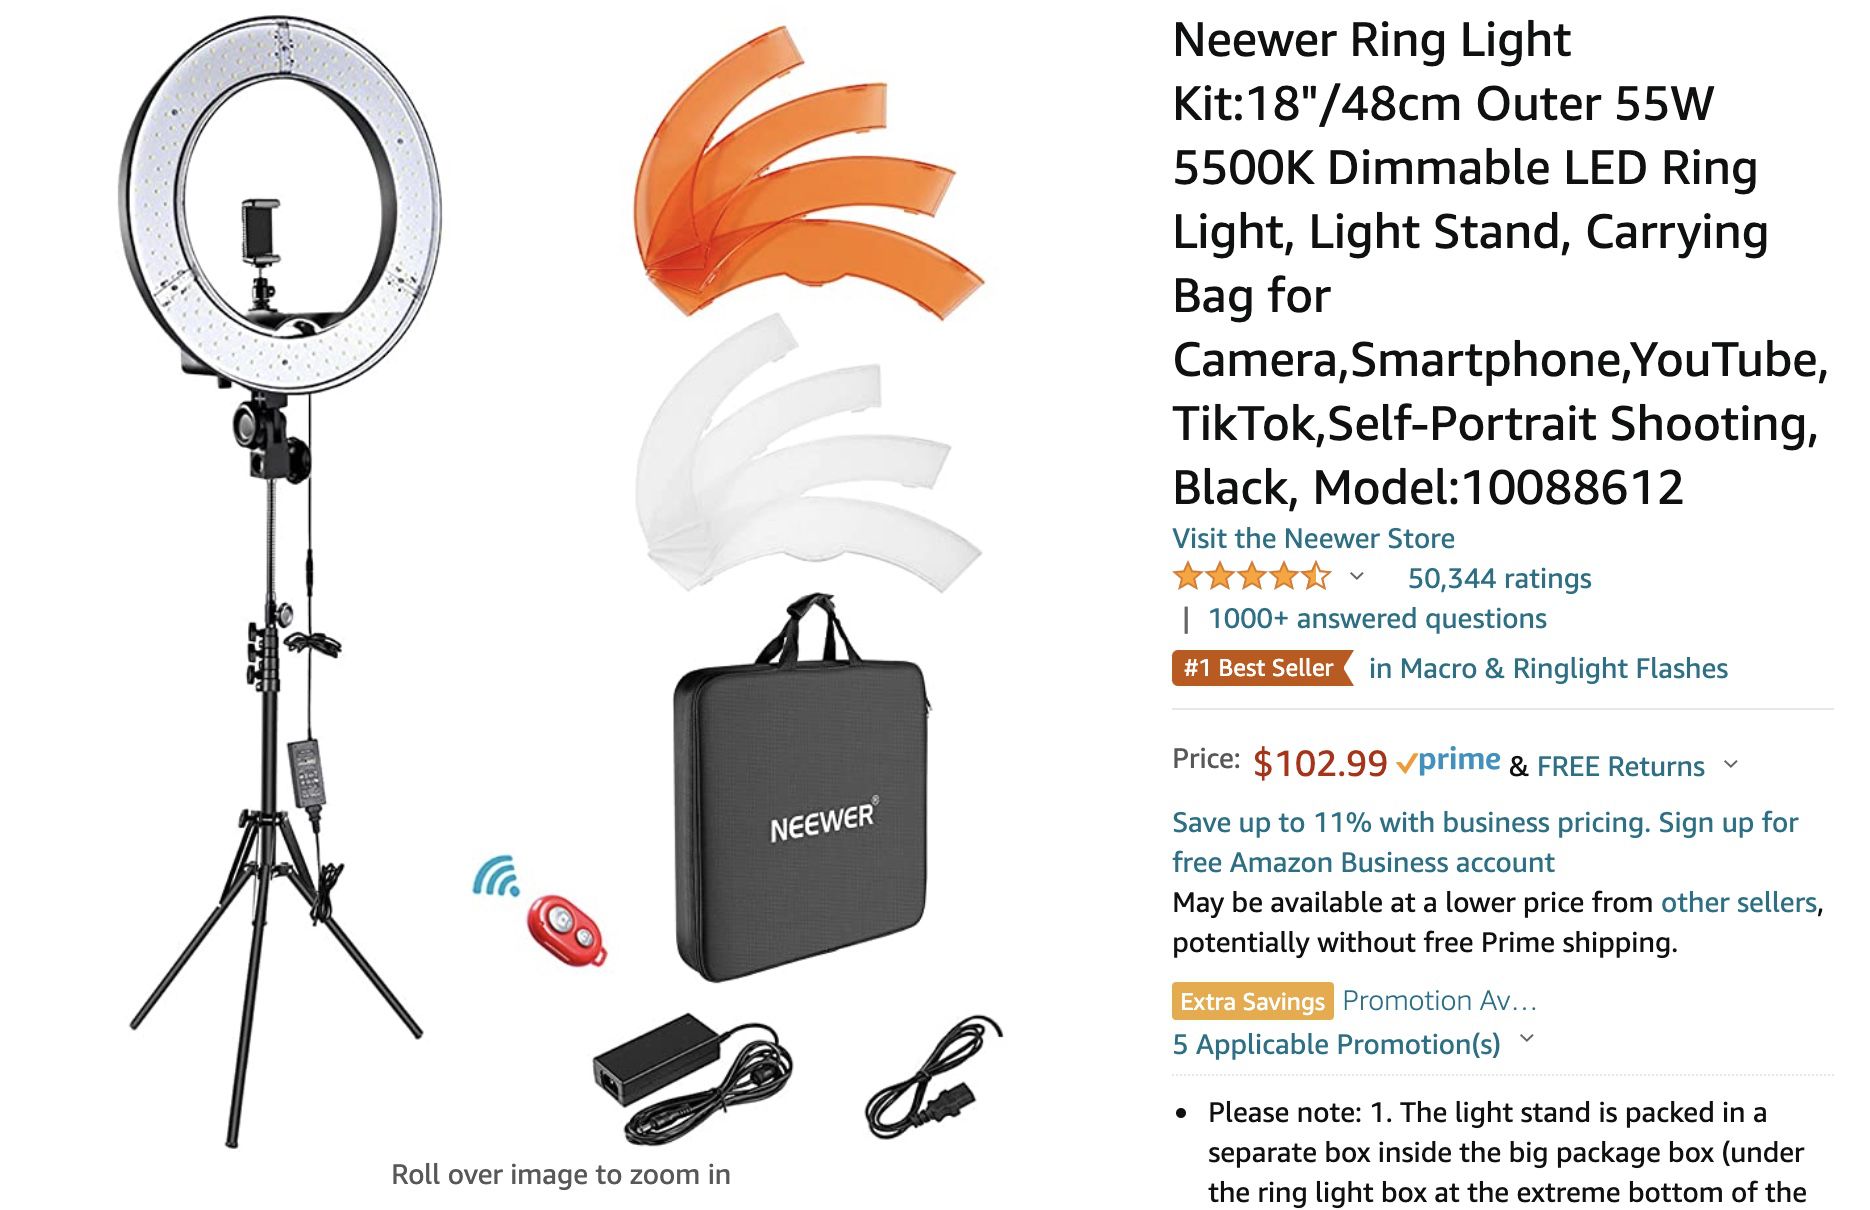 Neewer Ring Light Kit [18/48cm Outer 55W 5500K Dimmable LED Ring